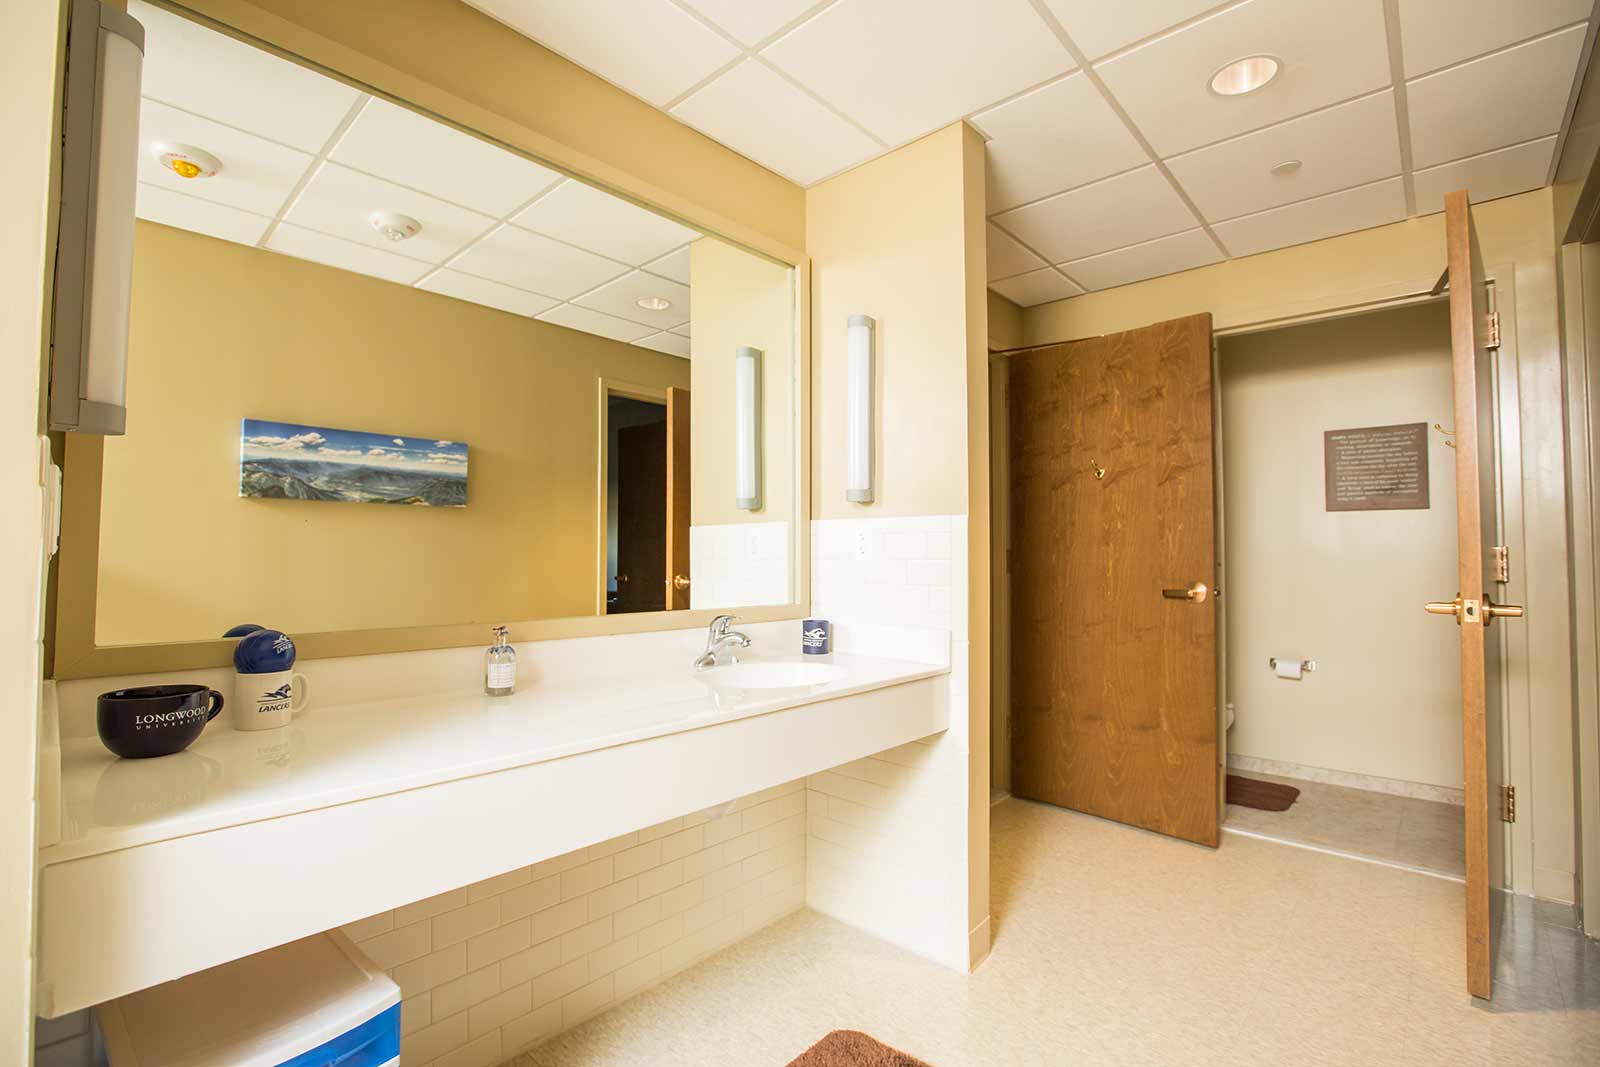 Restrooms in on-campus residence halls, with their wide countertops, are designed for ease and comfort.